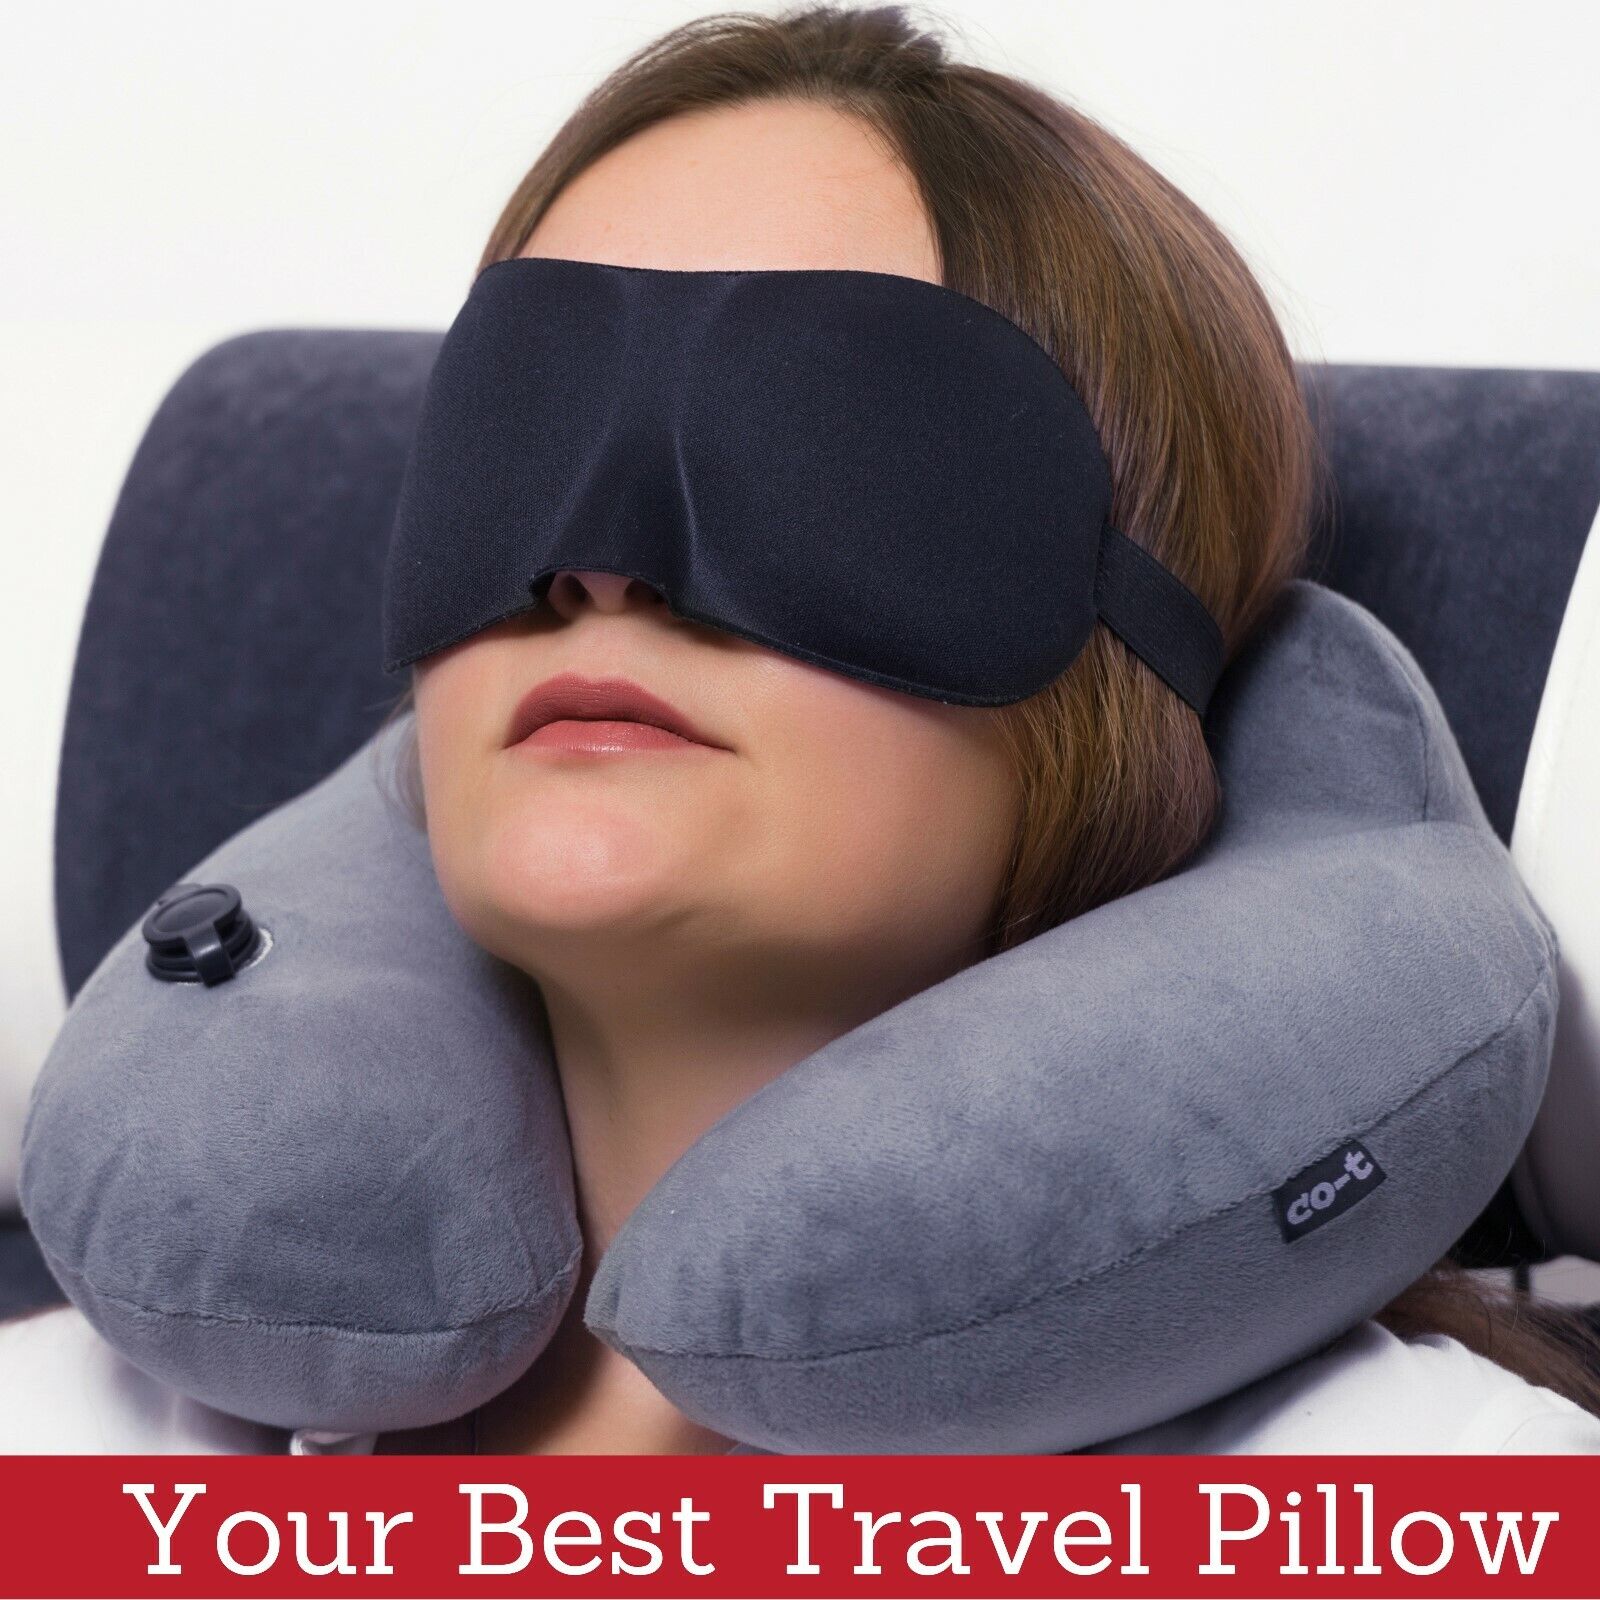 Inflatable Travel Pillow Set for Airplane - Neck Rest